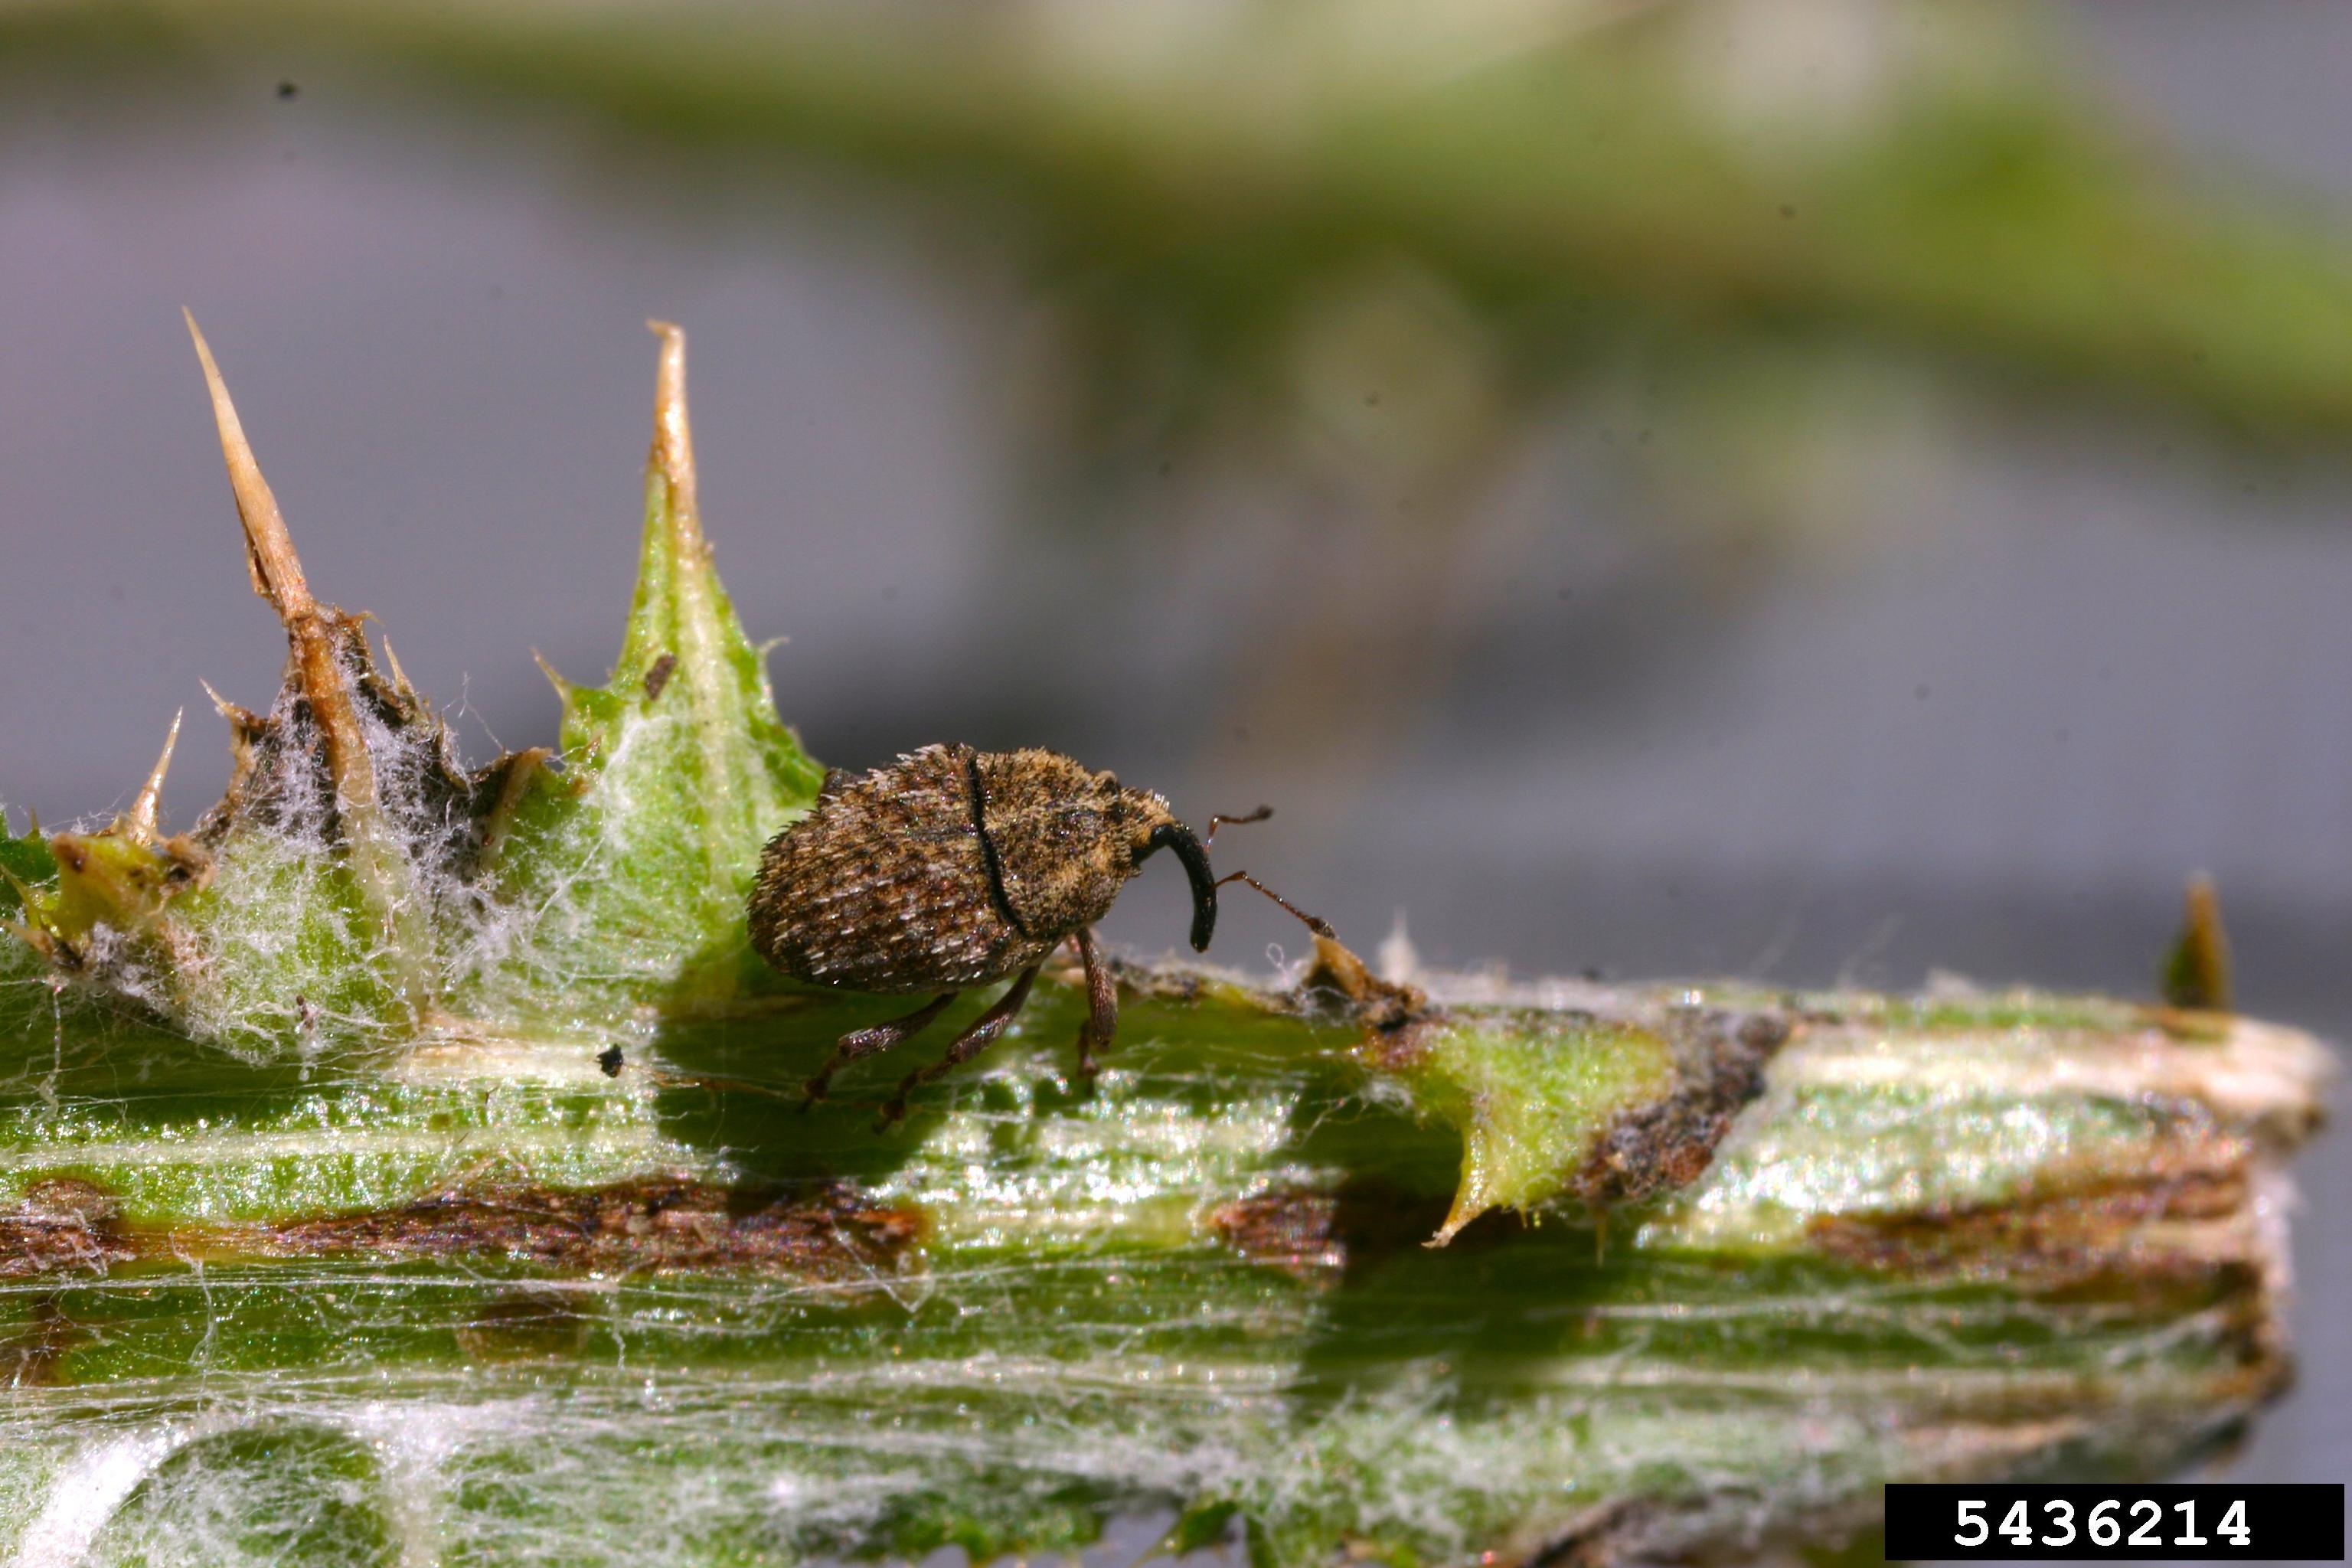 The rosette weevil sits on a leaf.